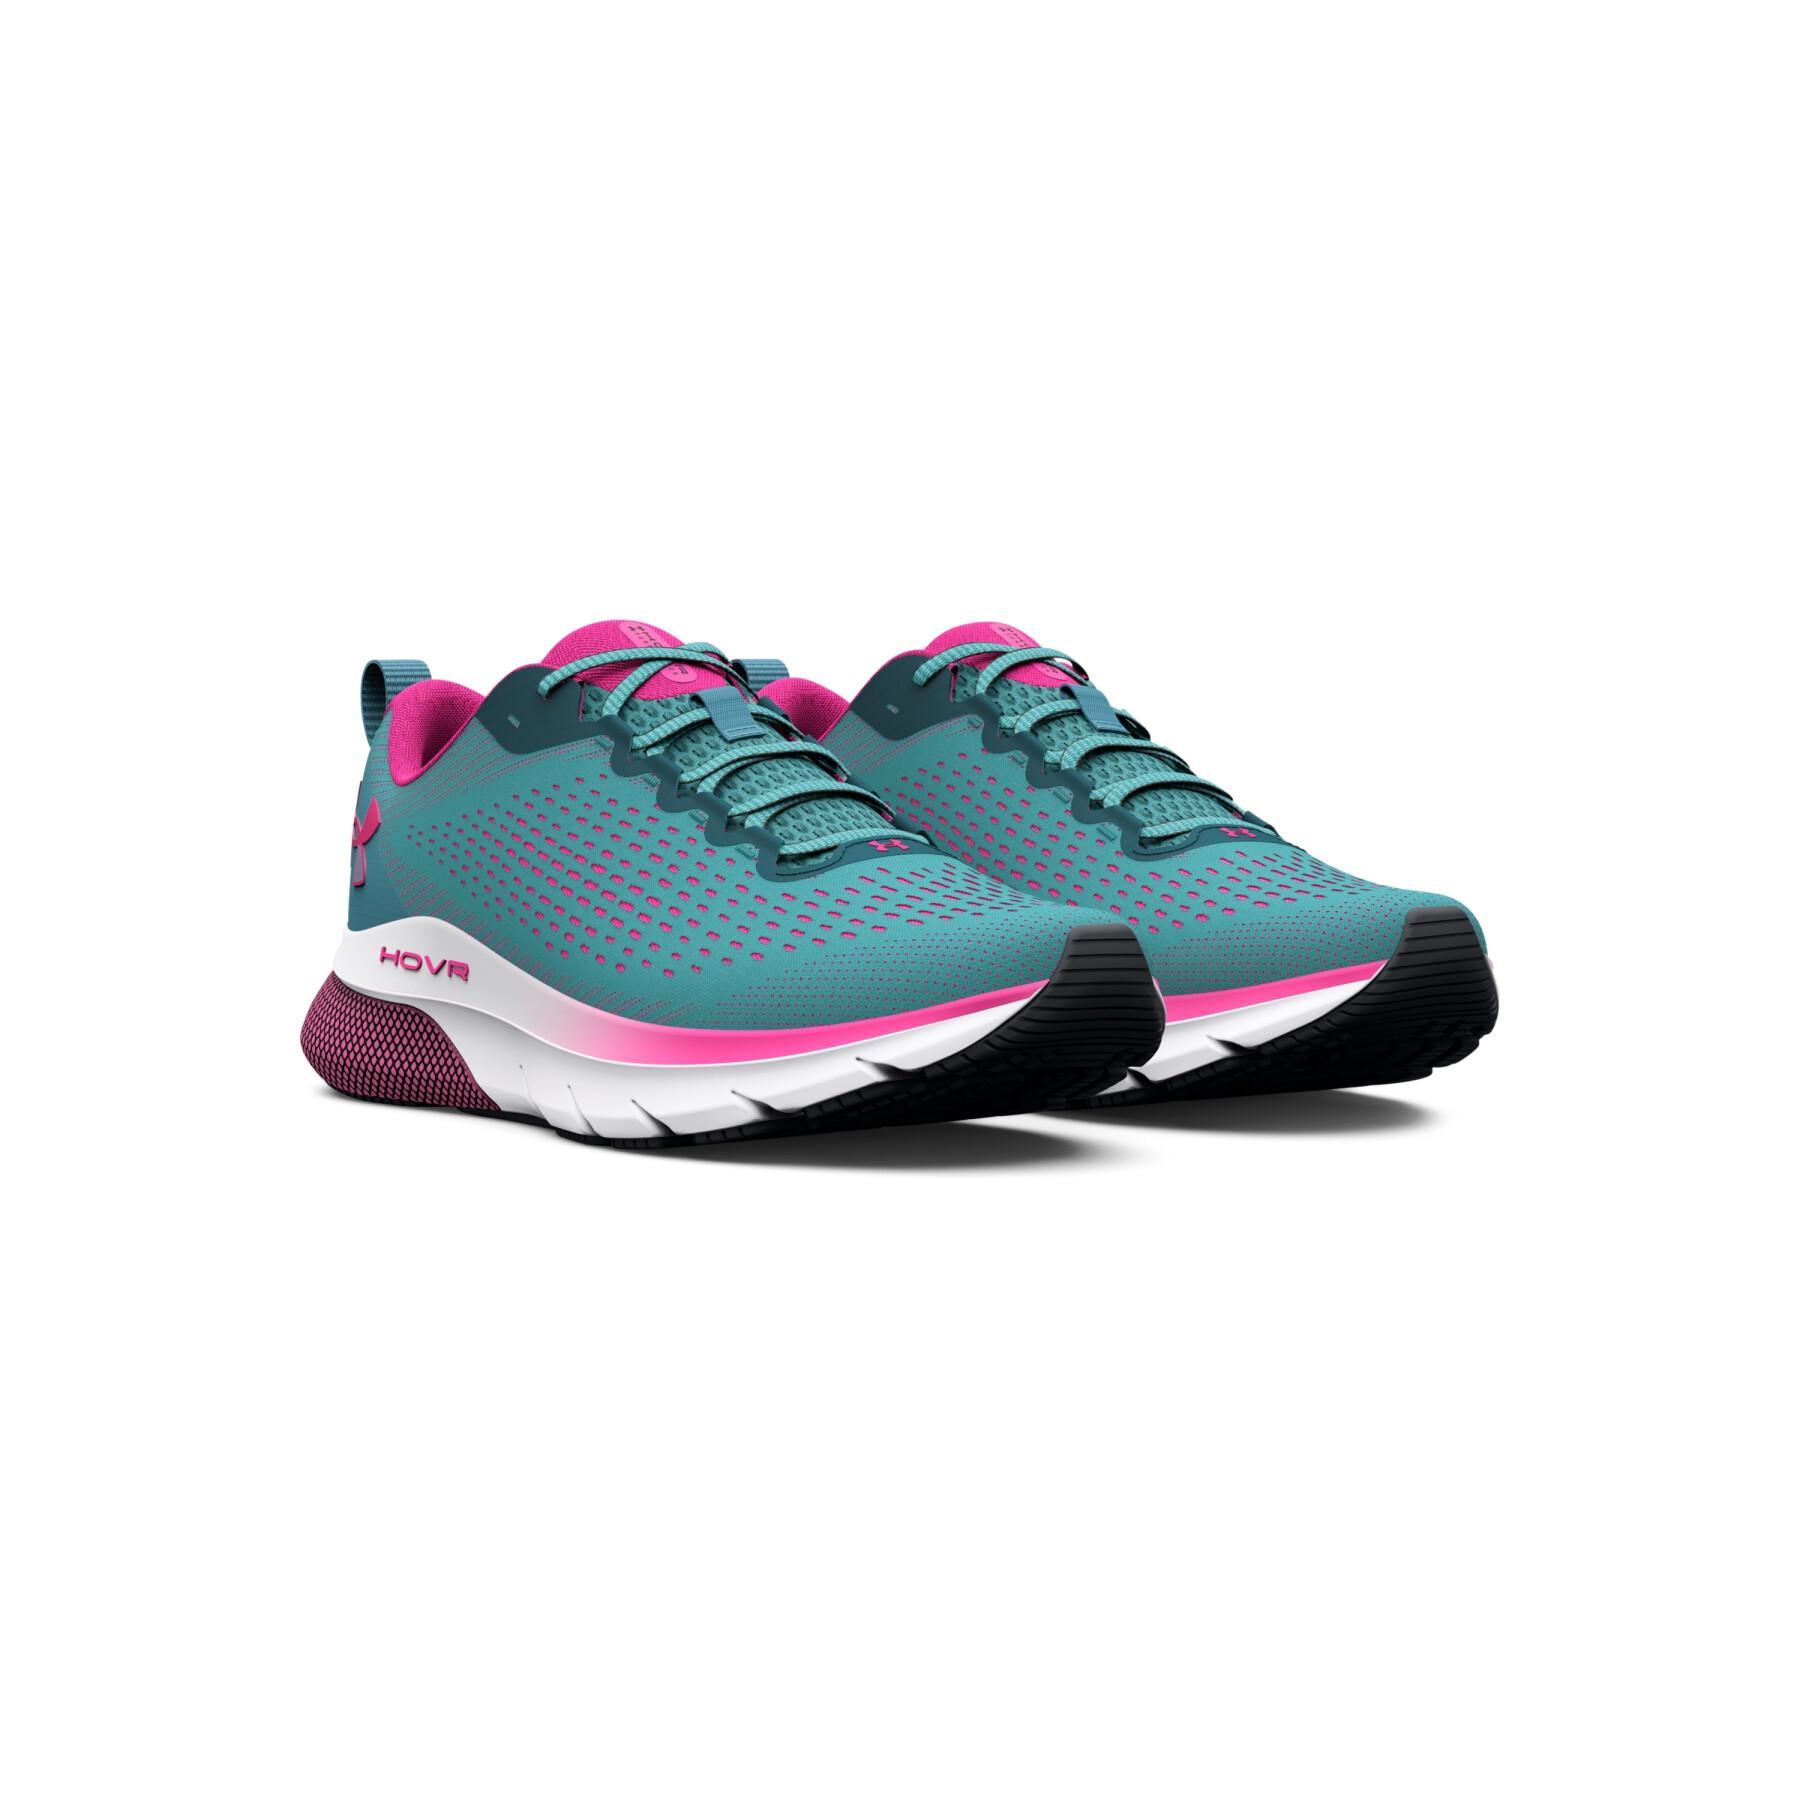 Women's running shoes Under Armour HOVR™ Turbulence